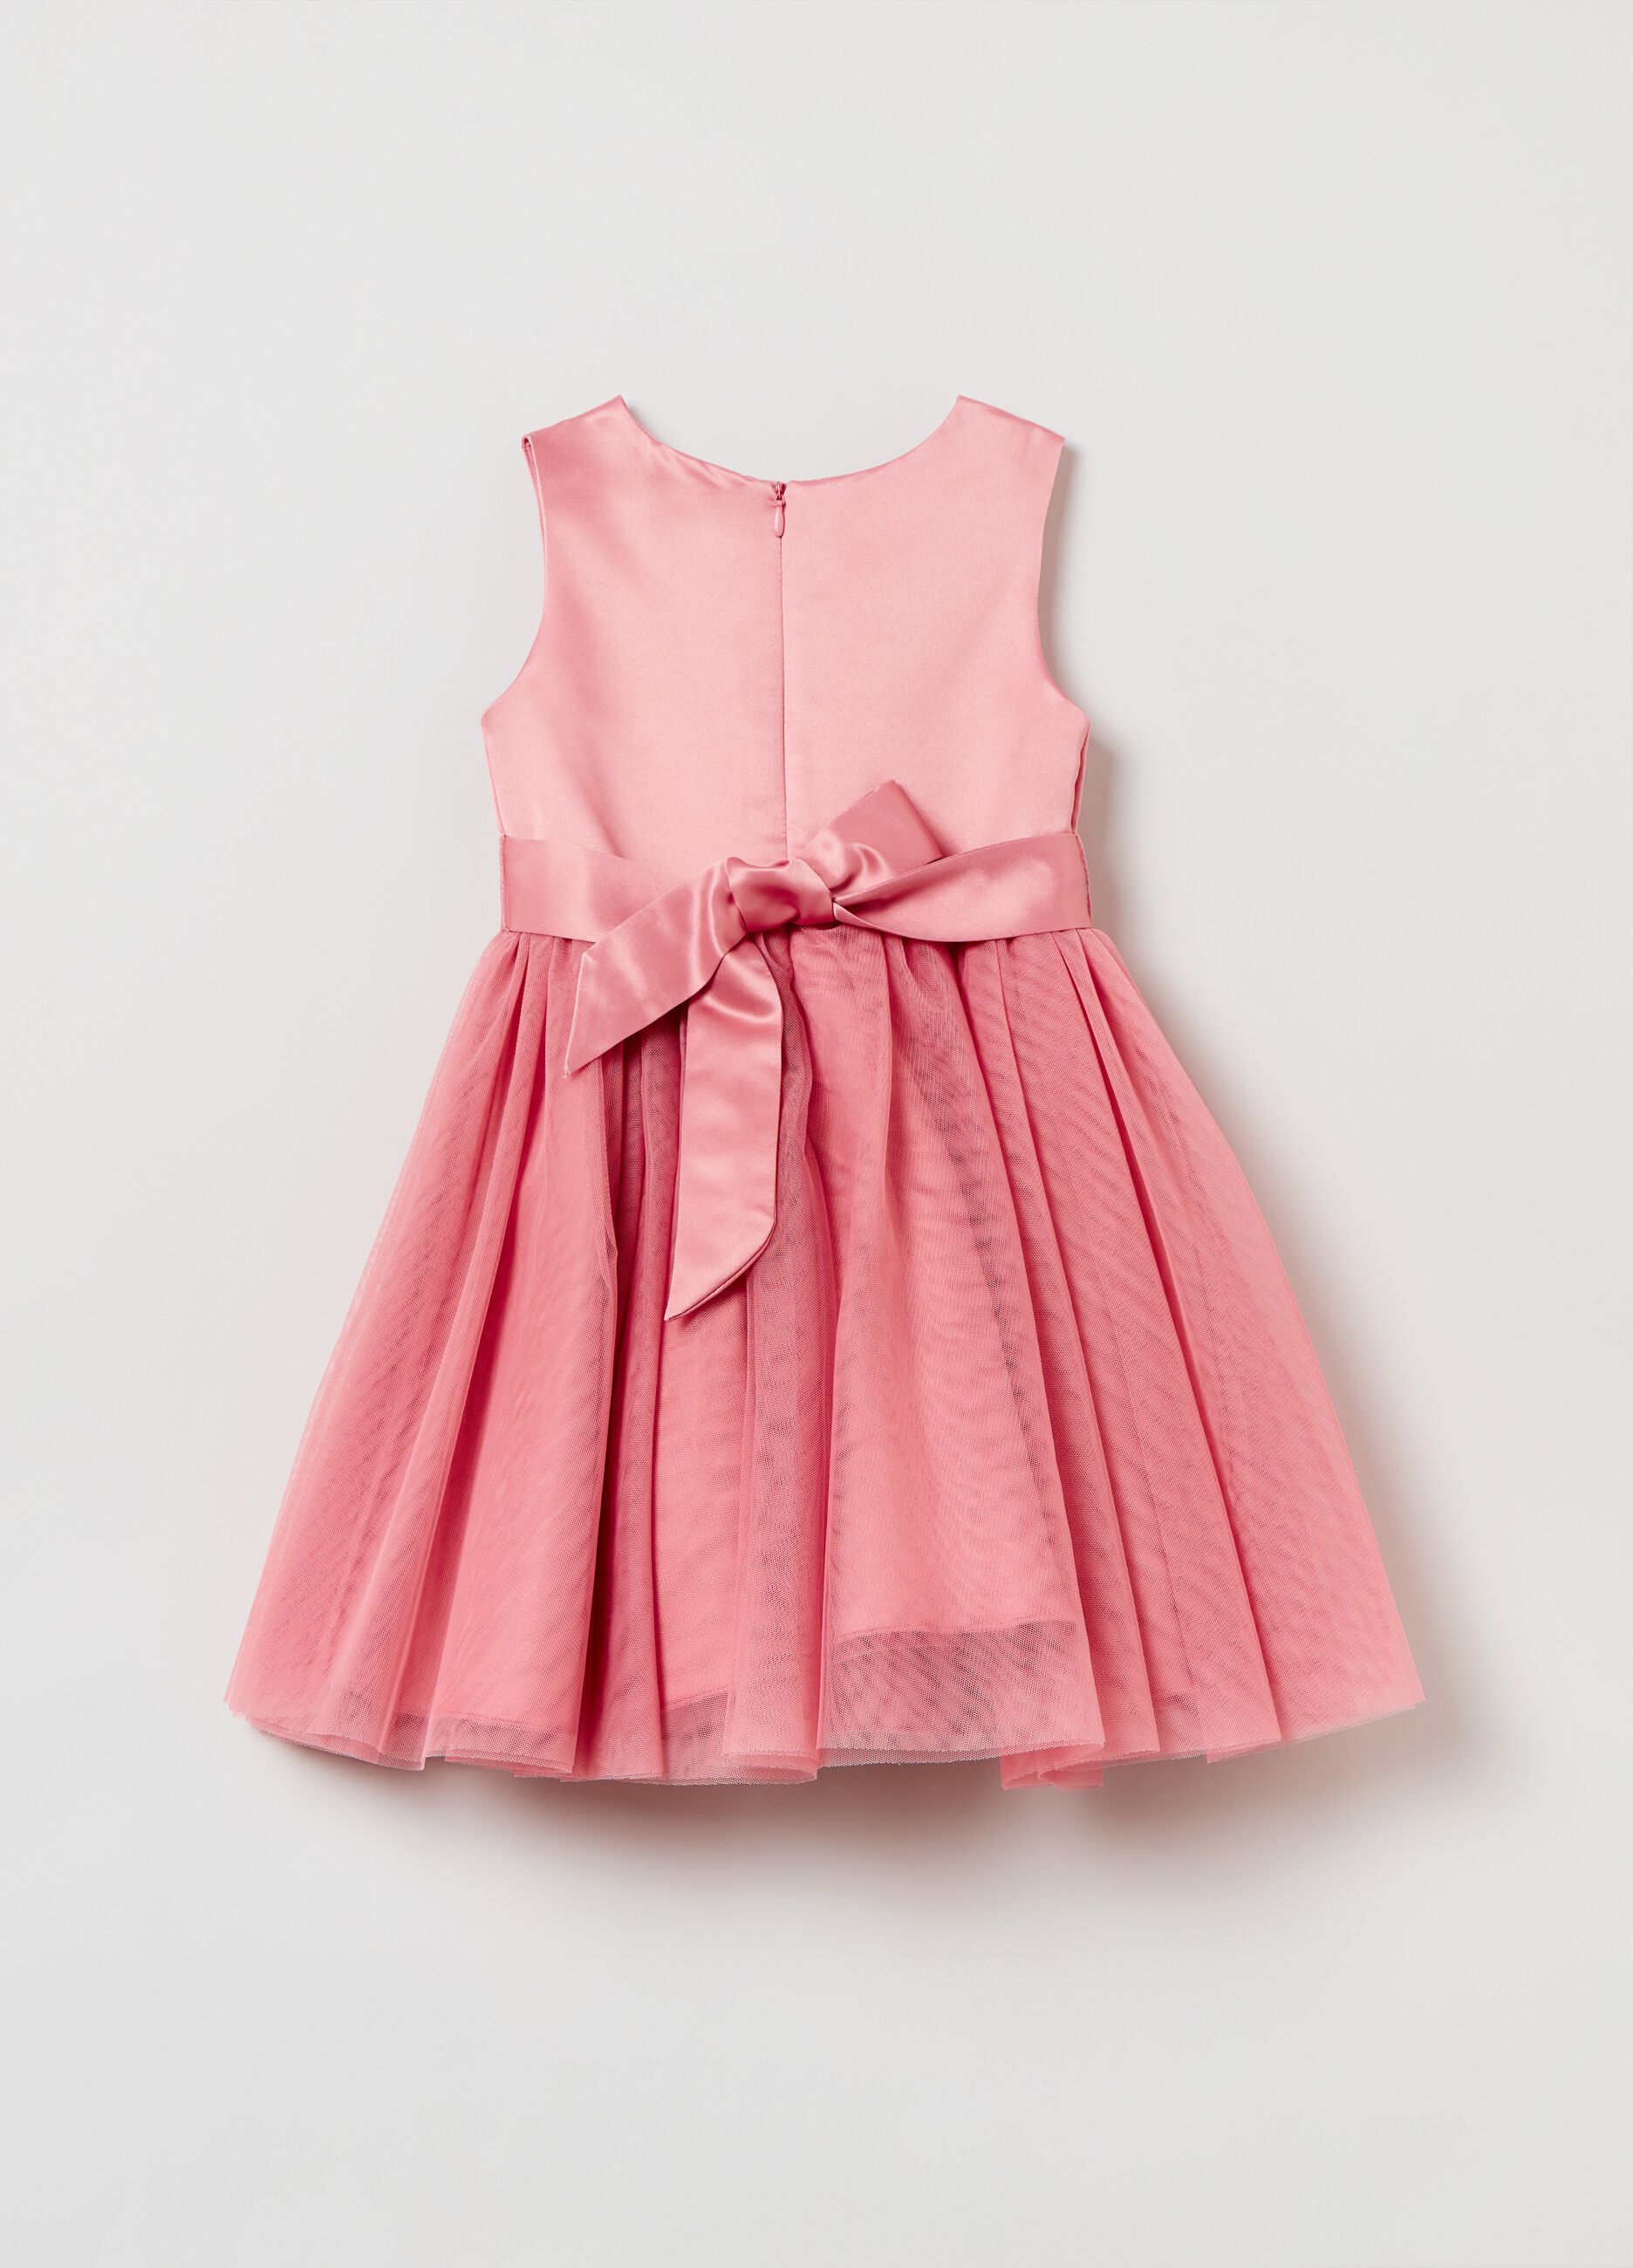 Satin dress with tulle skirt